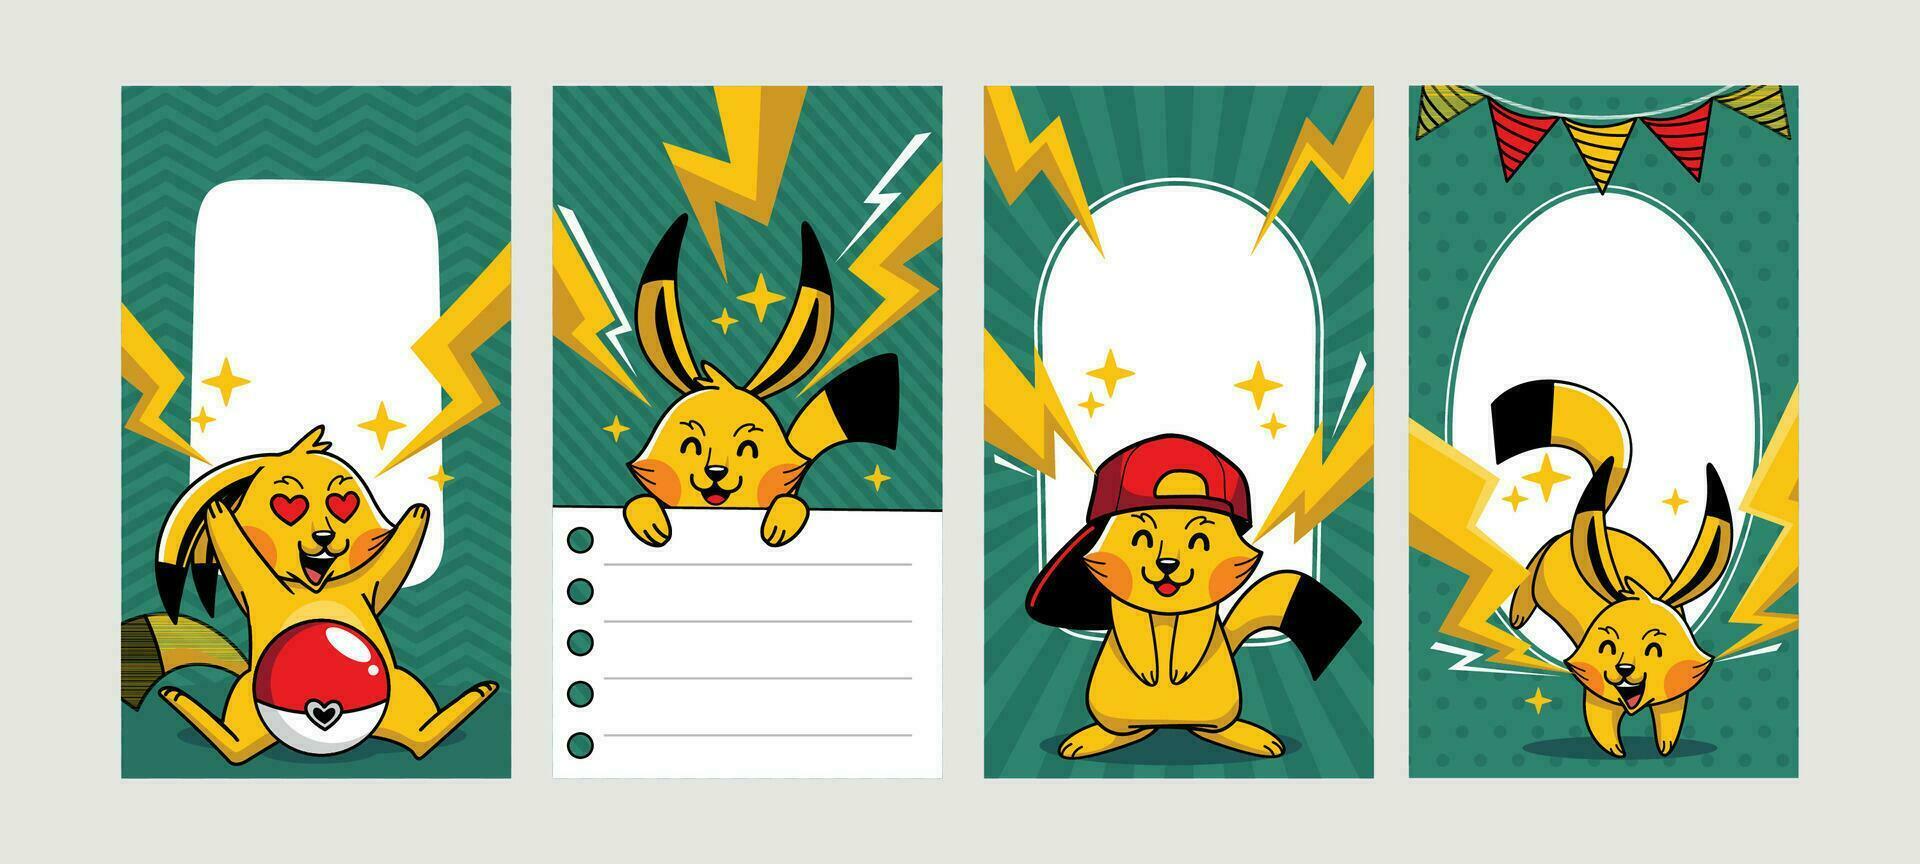 Cute Yellow Mouse With Electric Power for Social Media Story vector